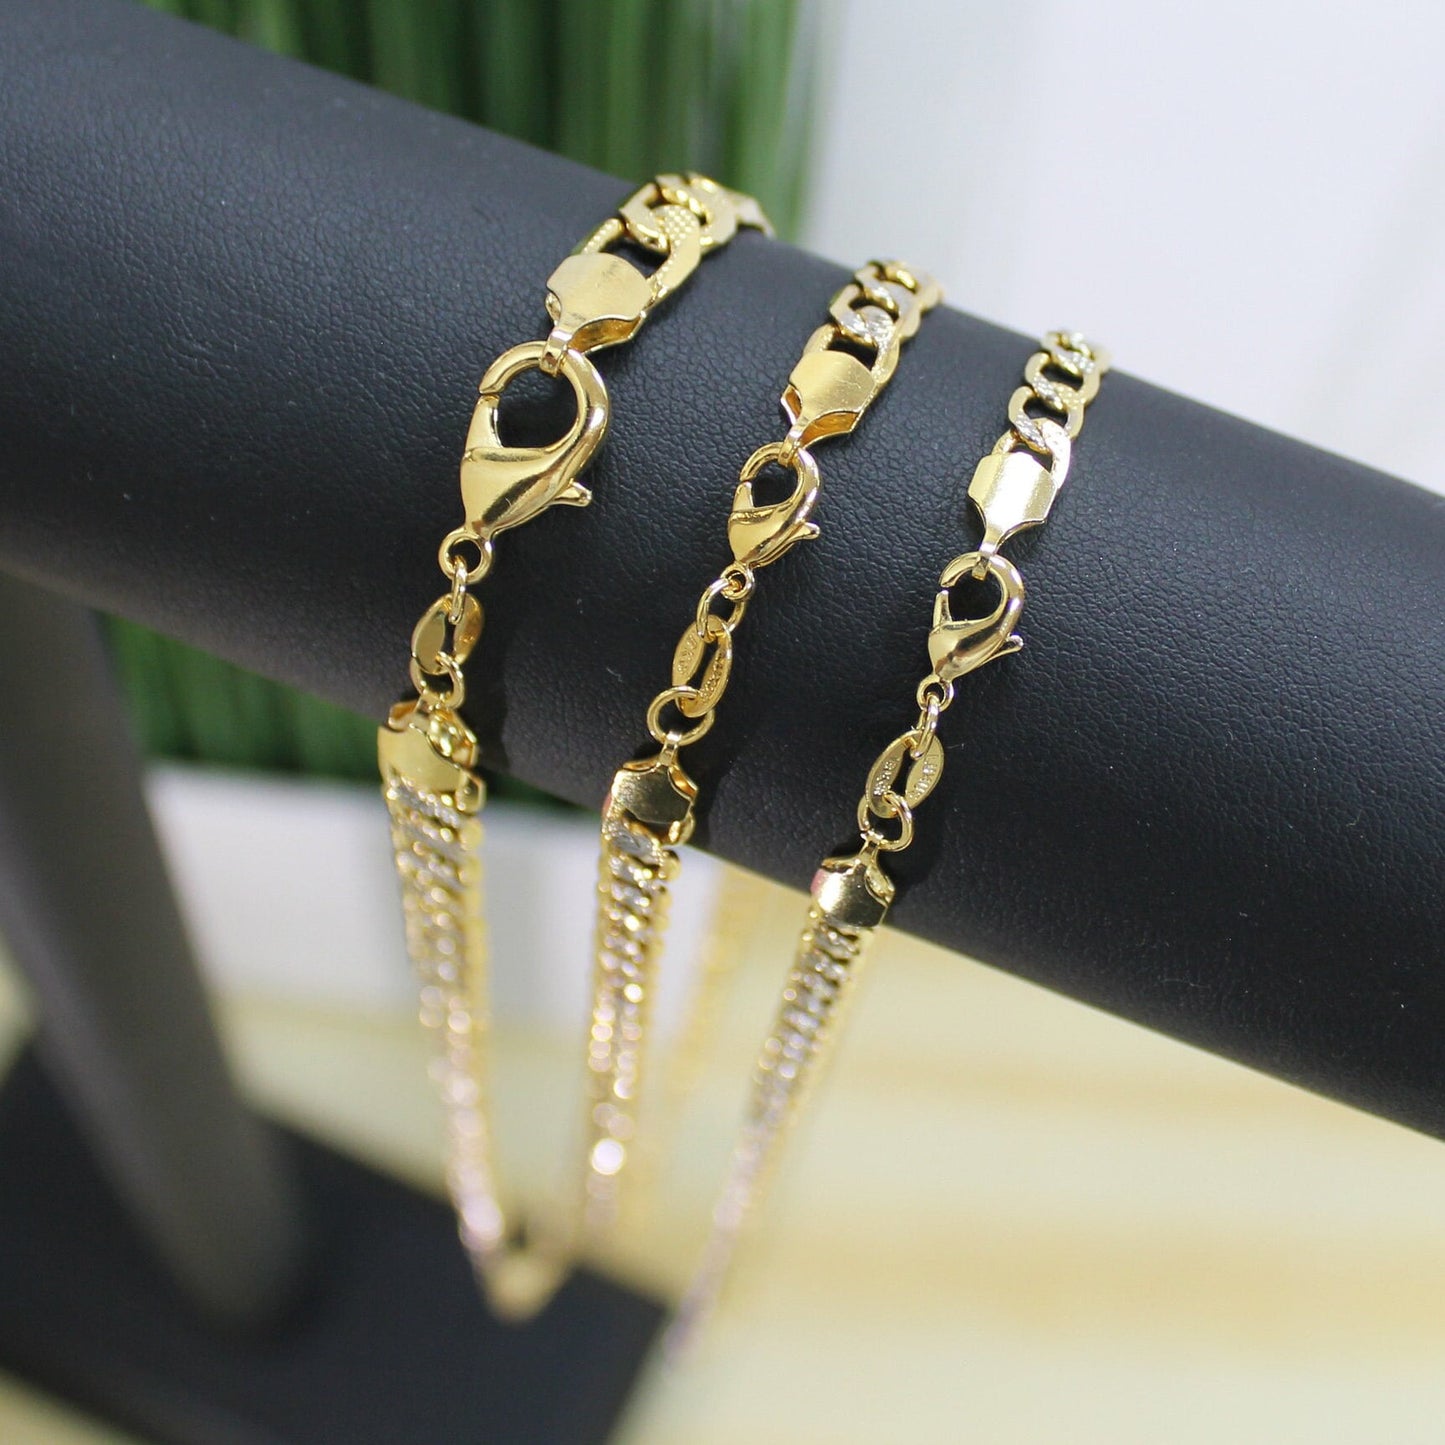 18k Gold Filled Cuban Curb Link, Two Tone Chain, Unisex Necklace, Wholesale Jewelry Making Supplies